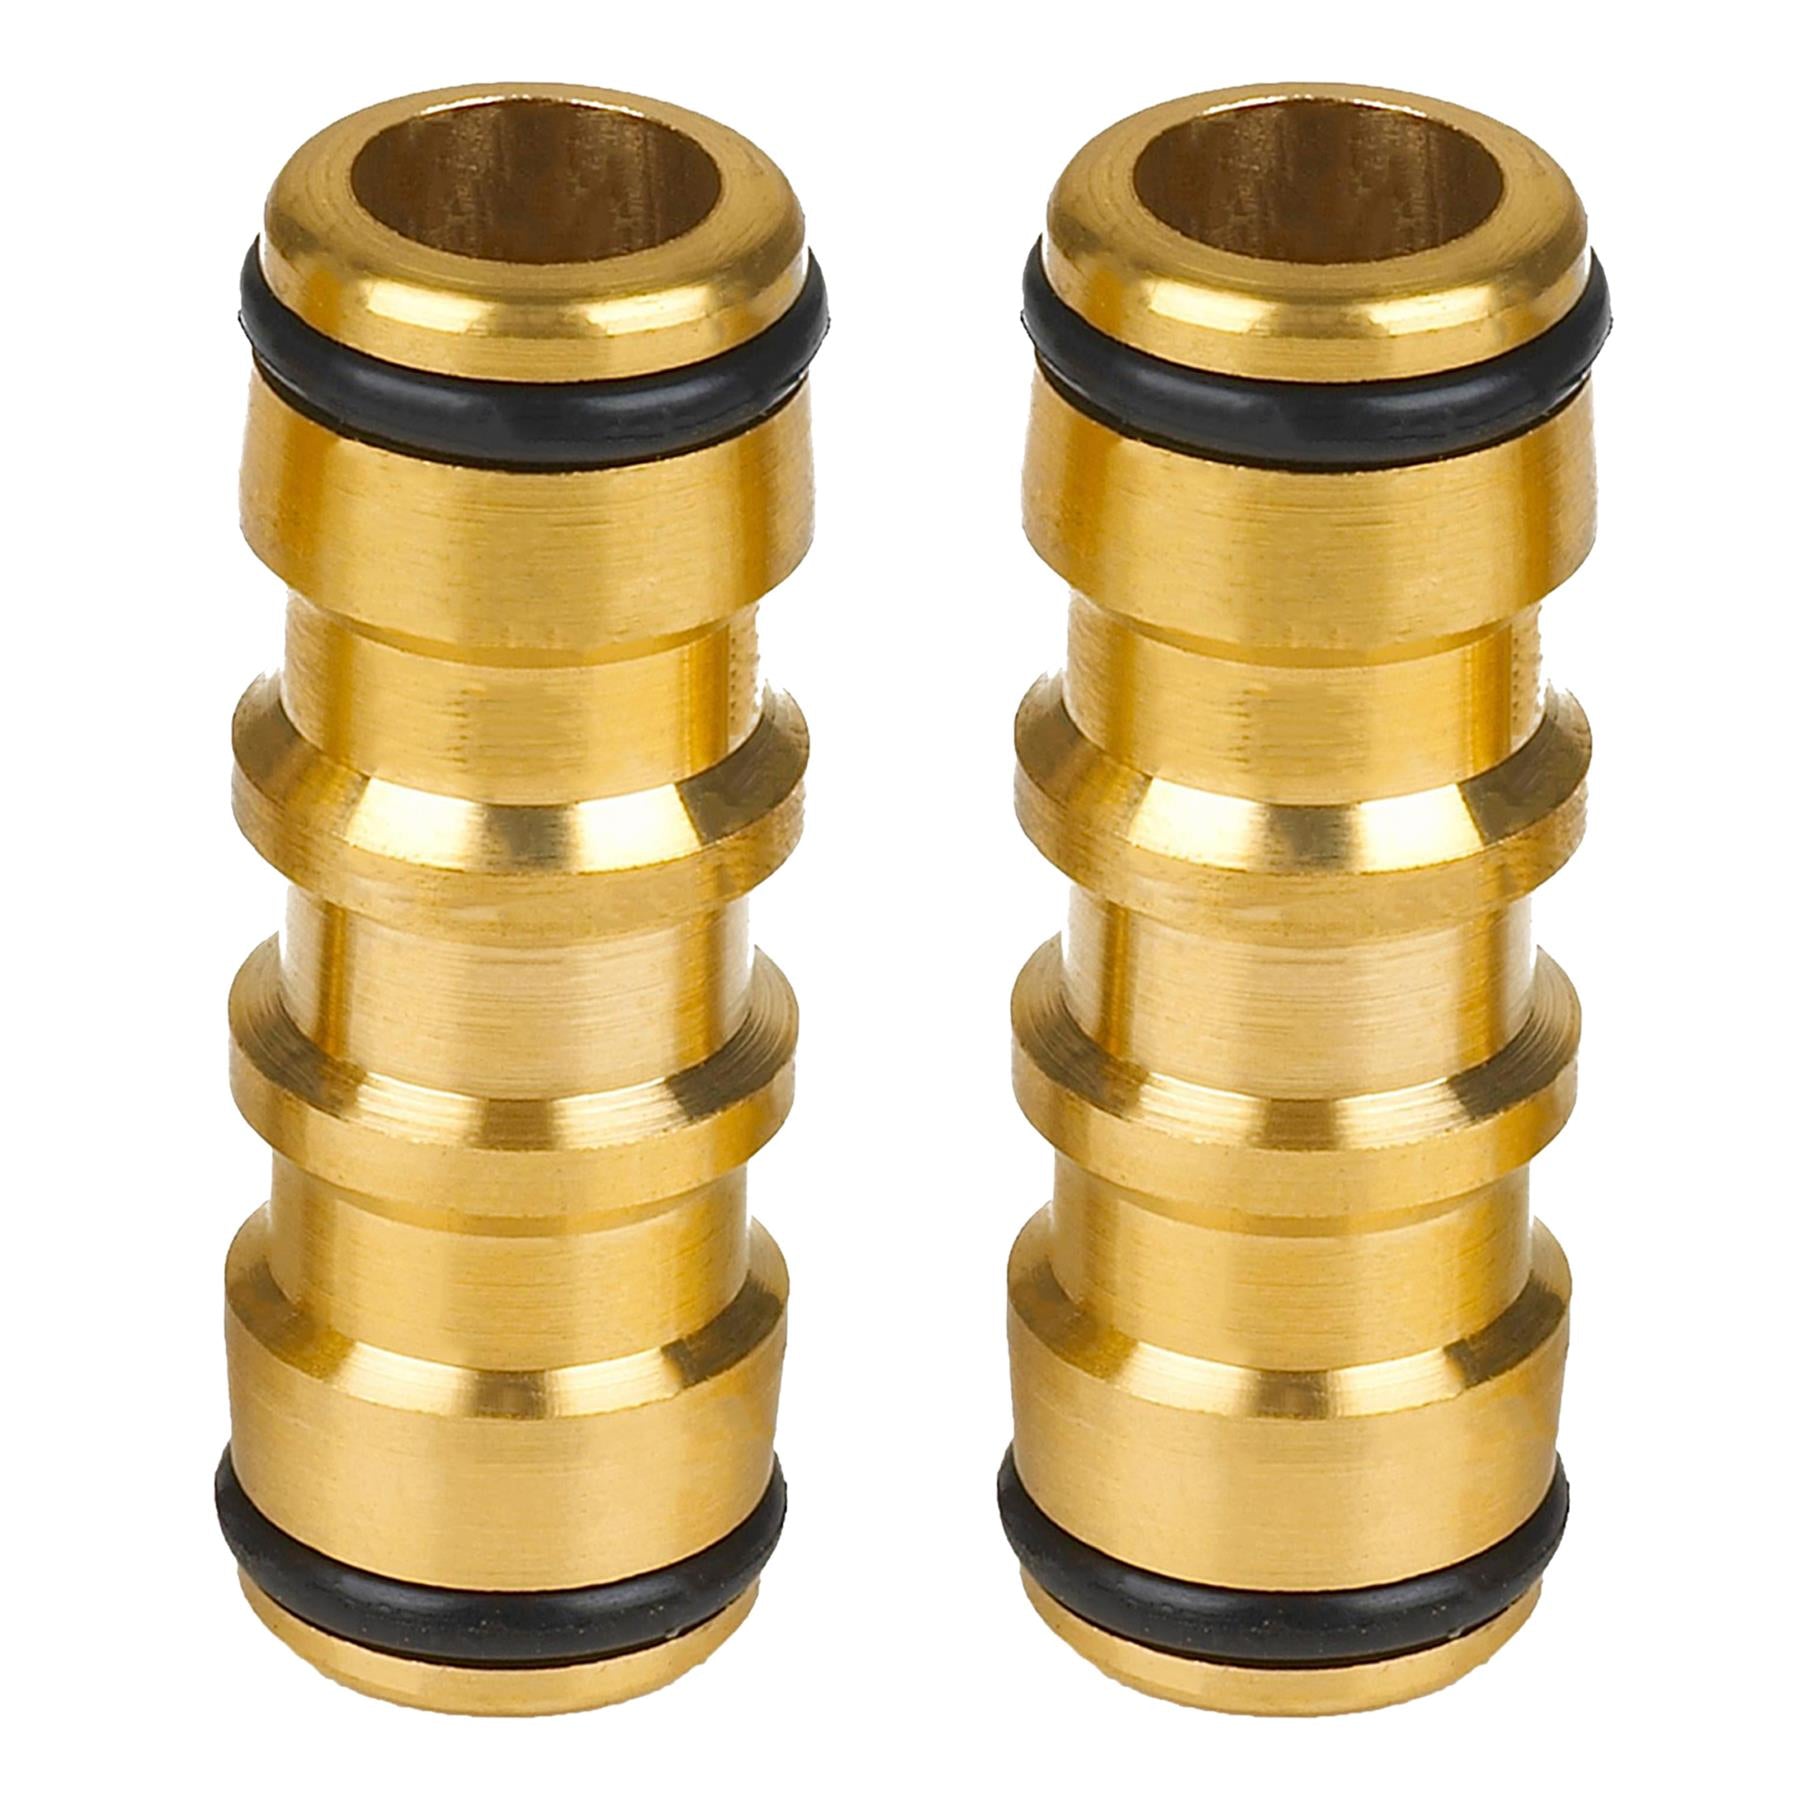 2 x Solid 1/2" Brass Quick